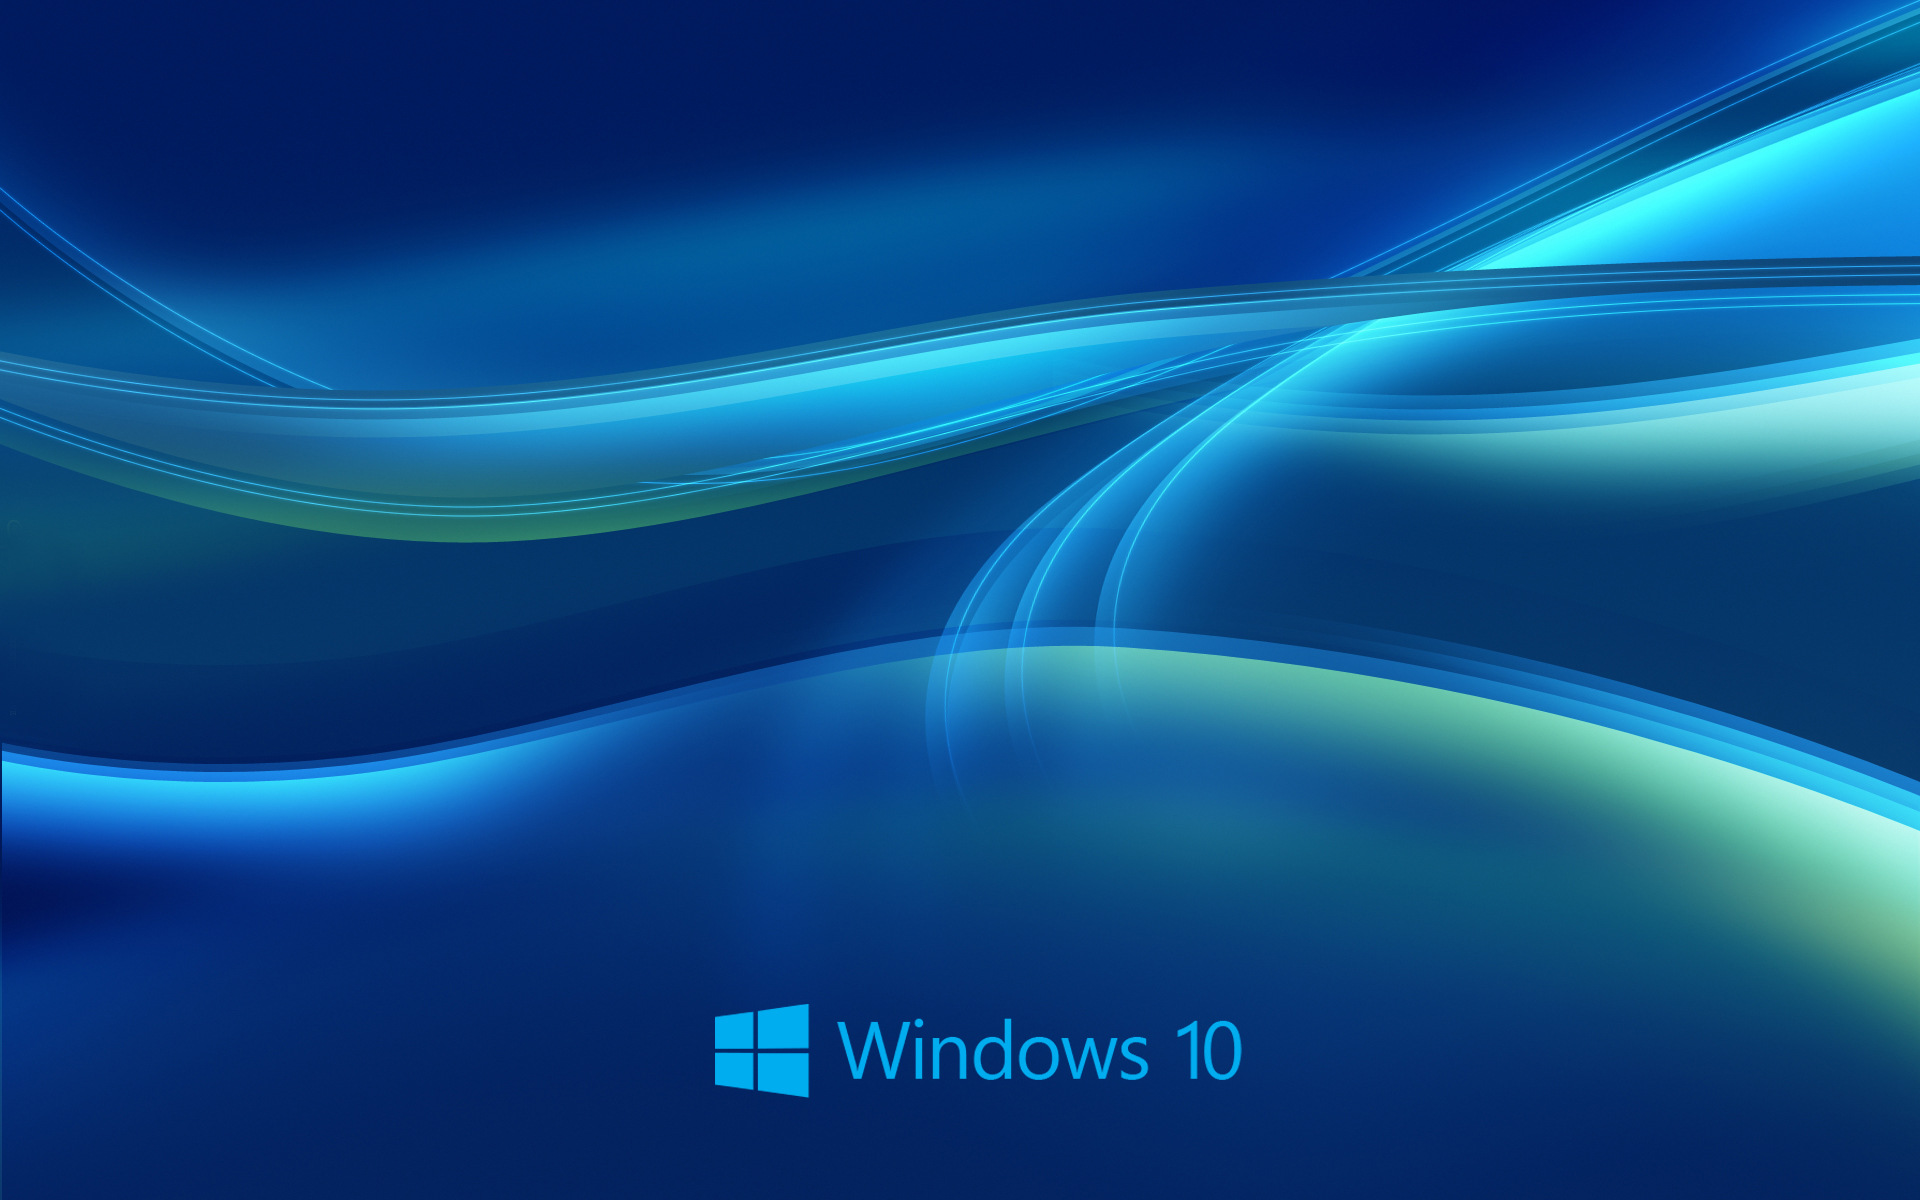 Windows 10 Logo Wallpaper and Theme Pack All for Windows 10 1920x1200